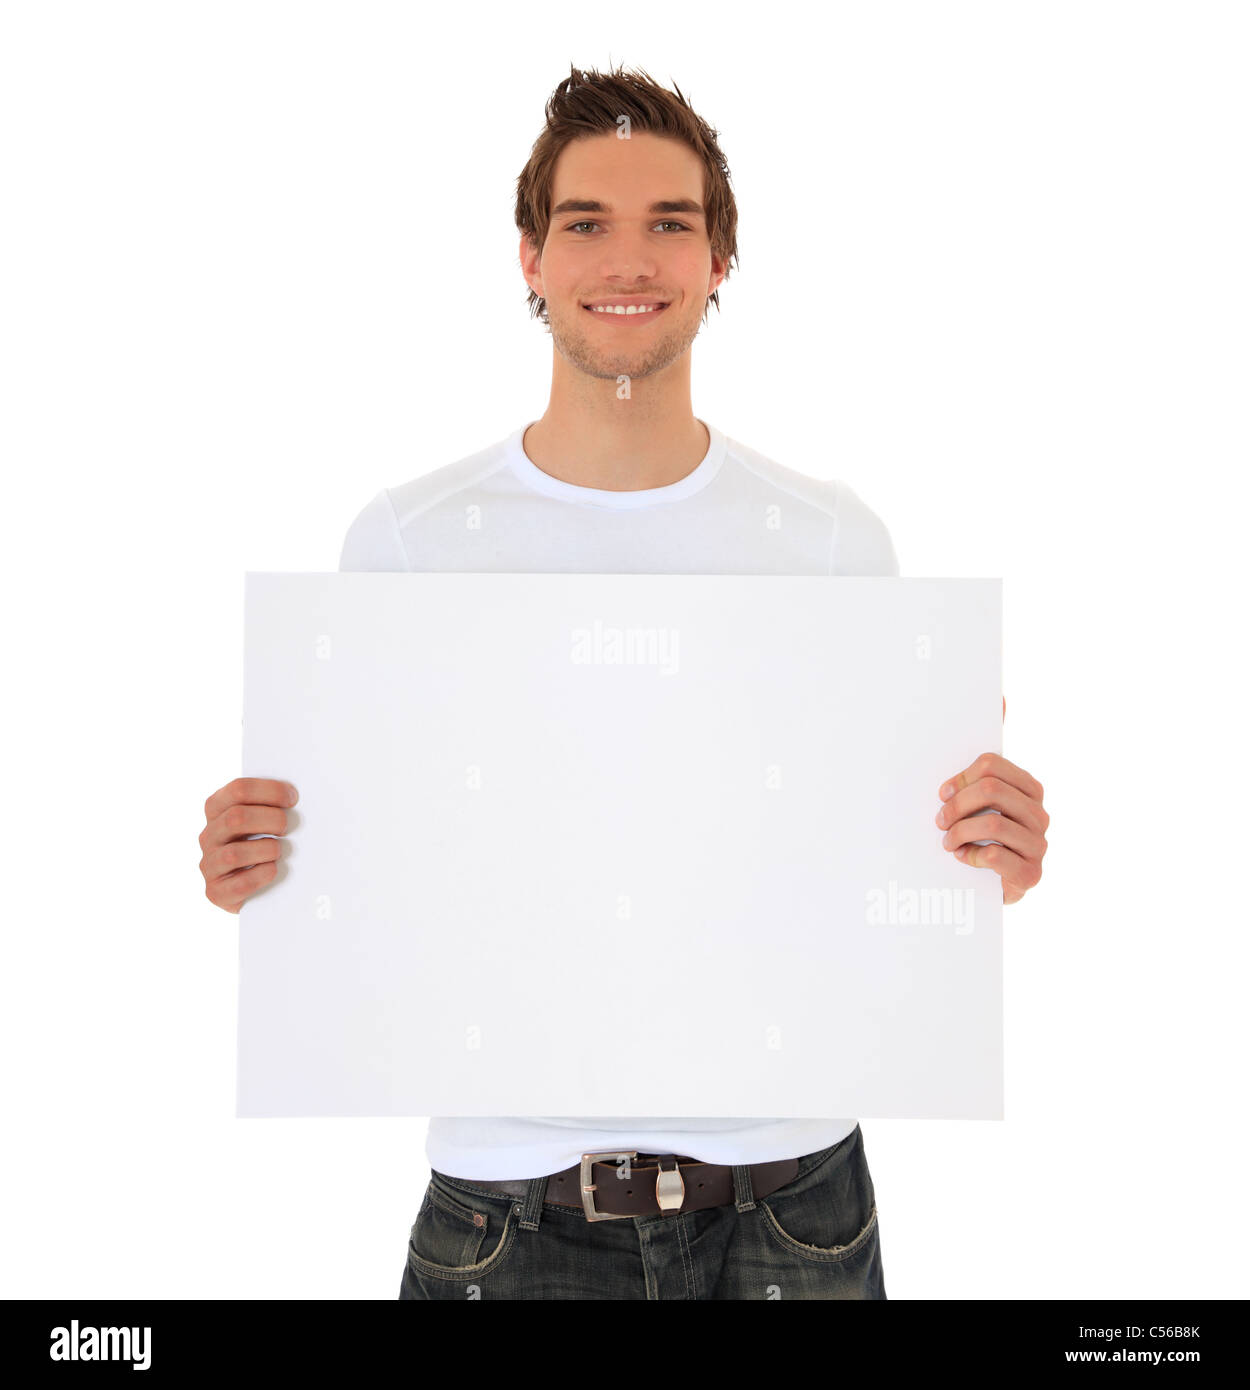 Attractive young man holding blank sign. All on white background. Stock Photo